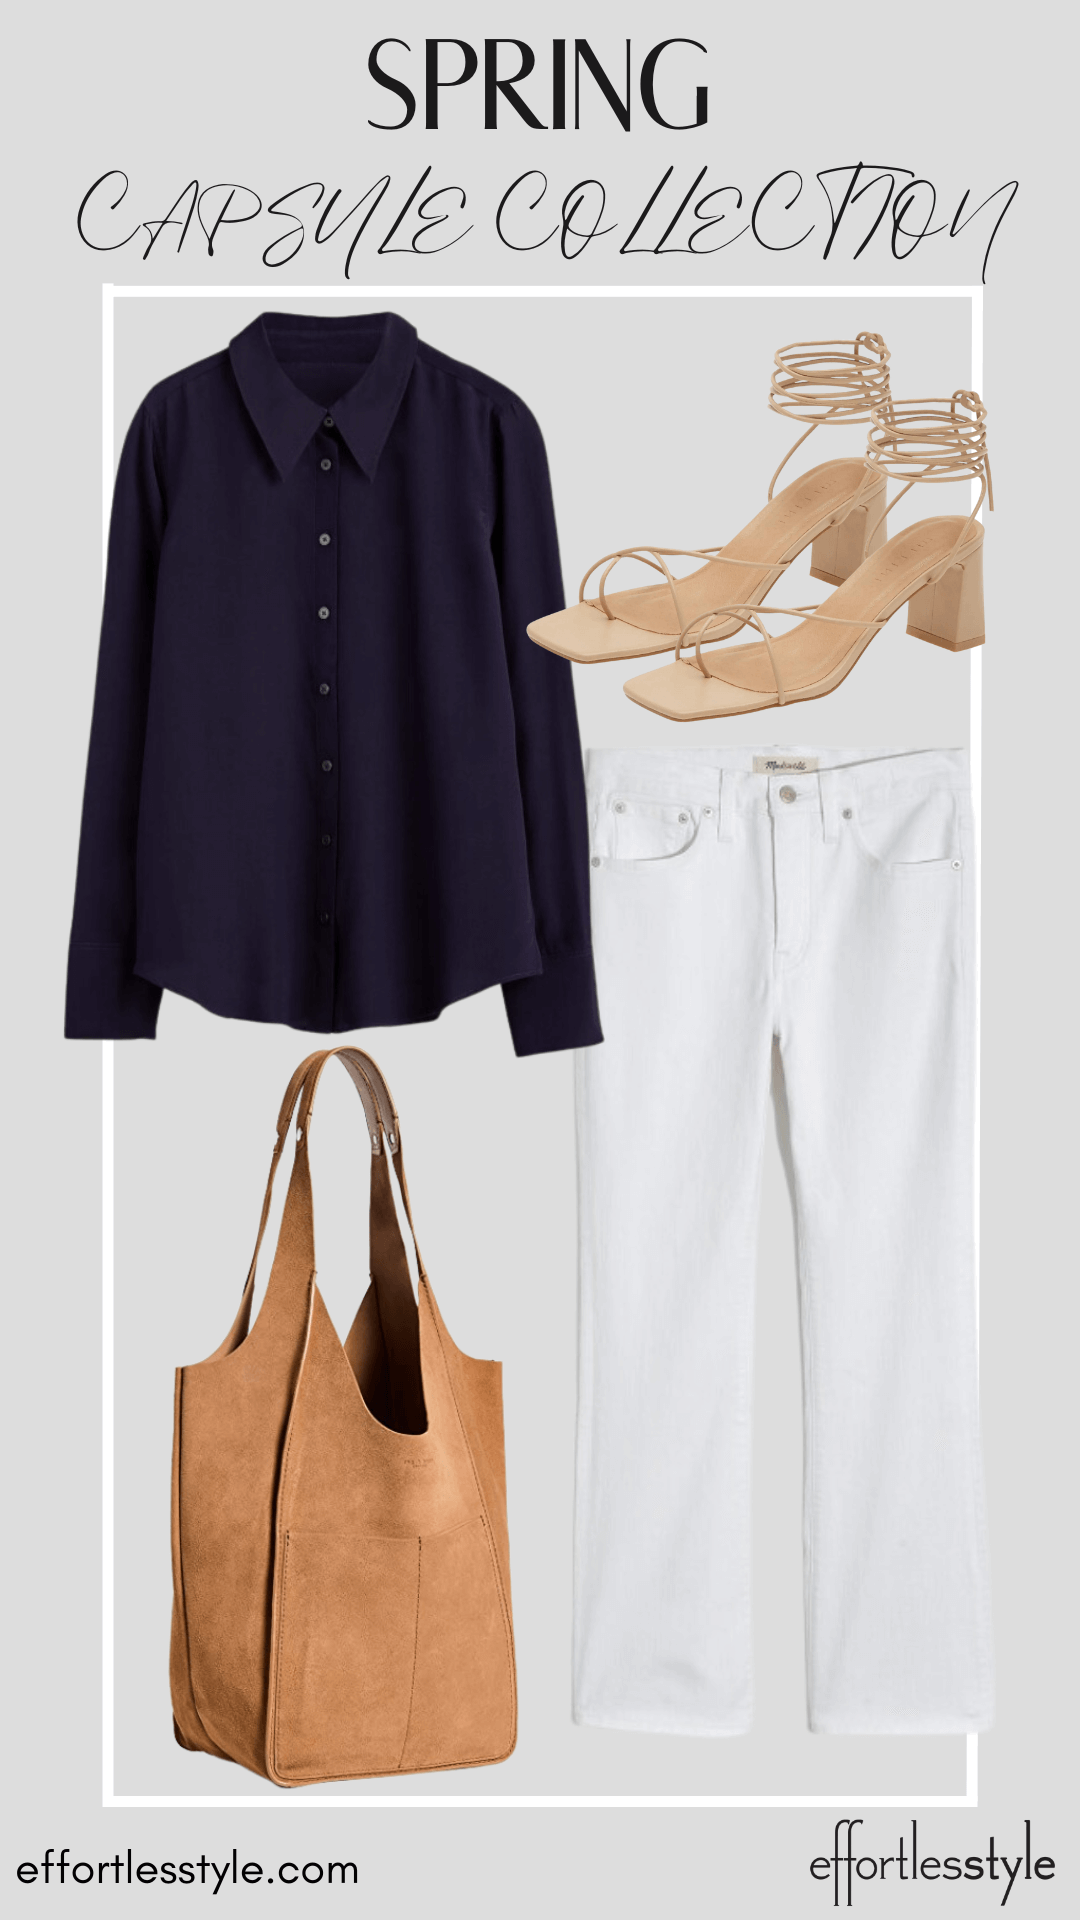 How To Wear Our Spring Capsule Wardrobe - Part 1 Solid Blouse & White Jeans essentials for spring how to dress up your white jeans how to wear white jeans to work how to style white jeans for the office